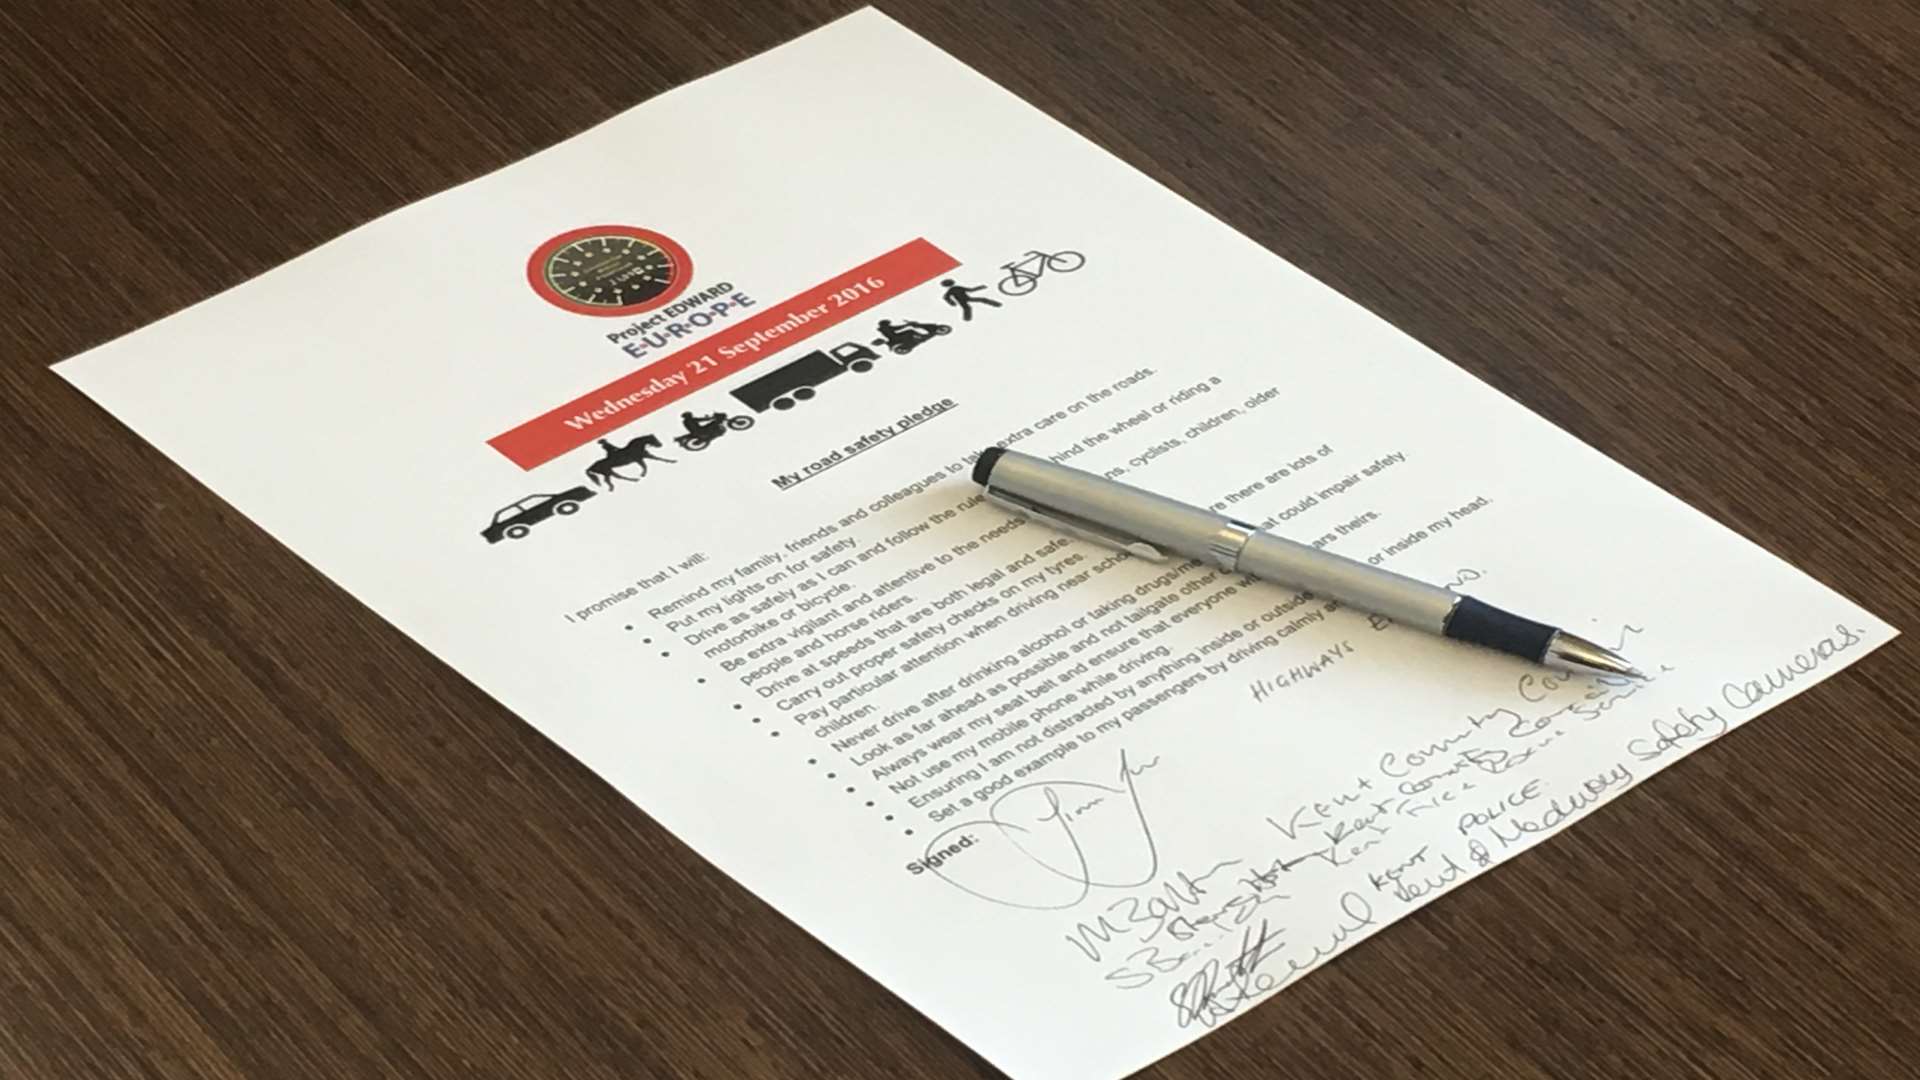 They all signed the pledge at a meeting at County Hall